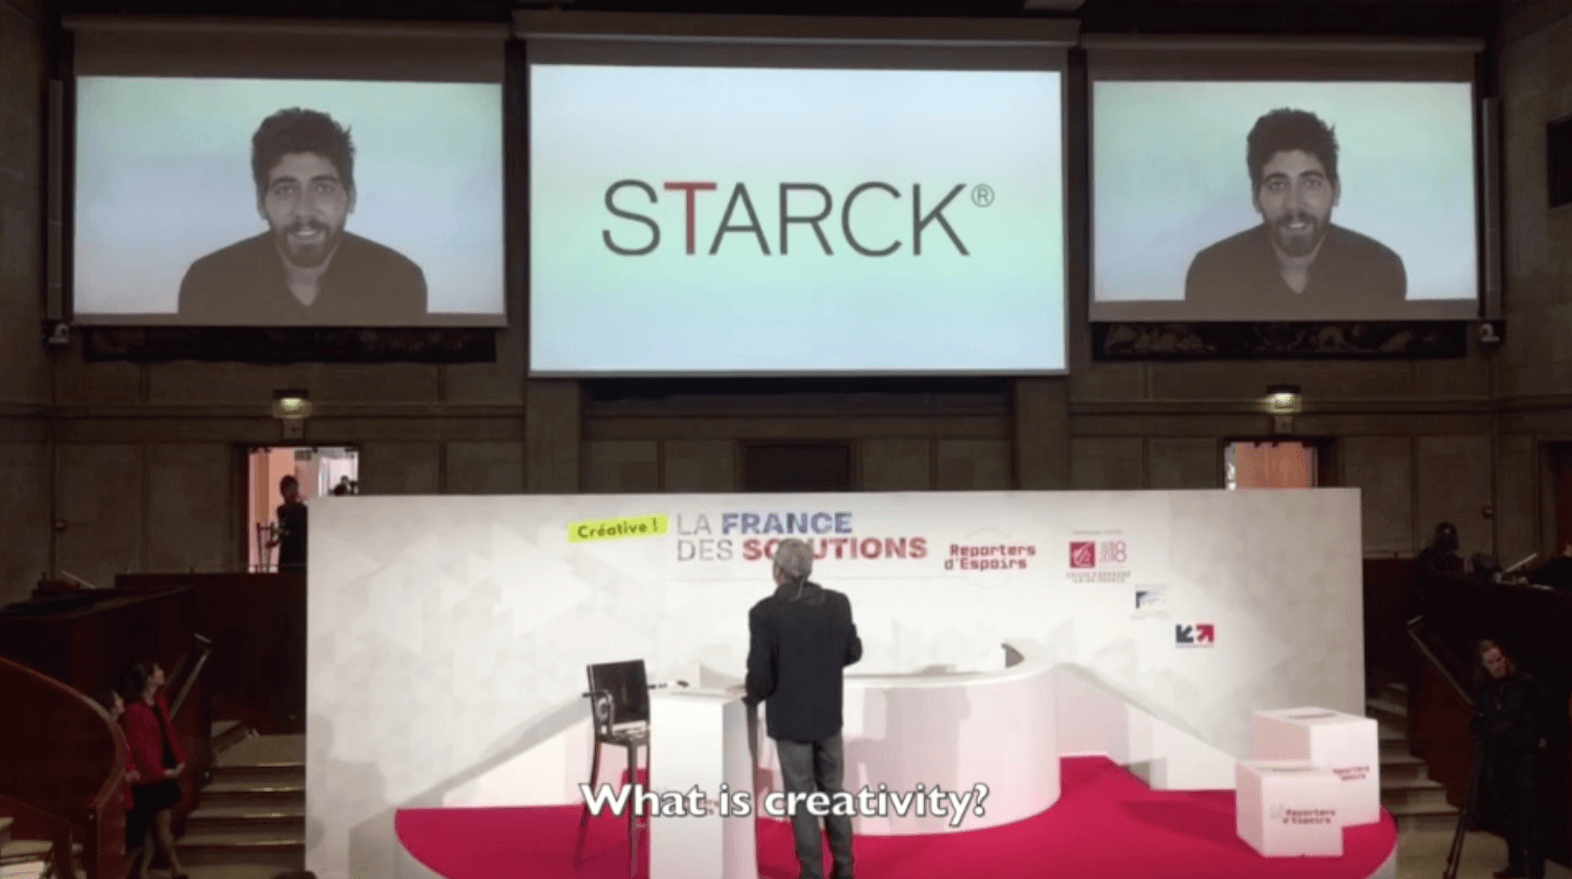 Philippe Starck presented a definition of creativity at La France des Solutions 2017